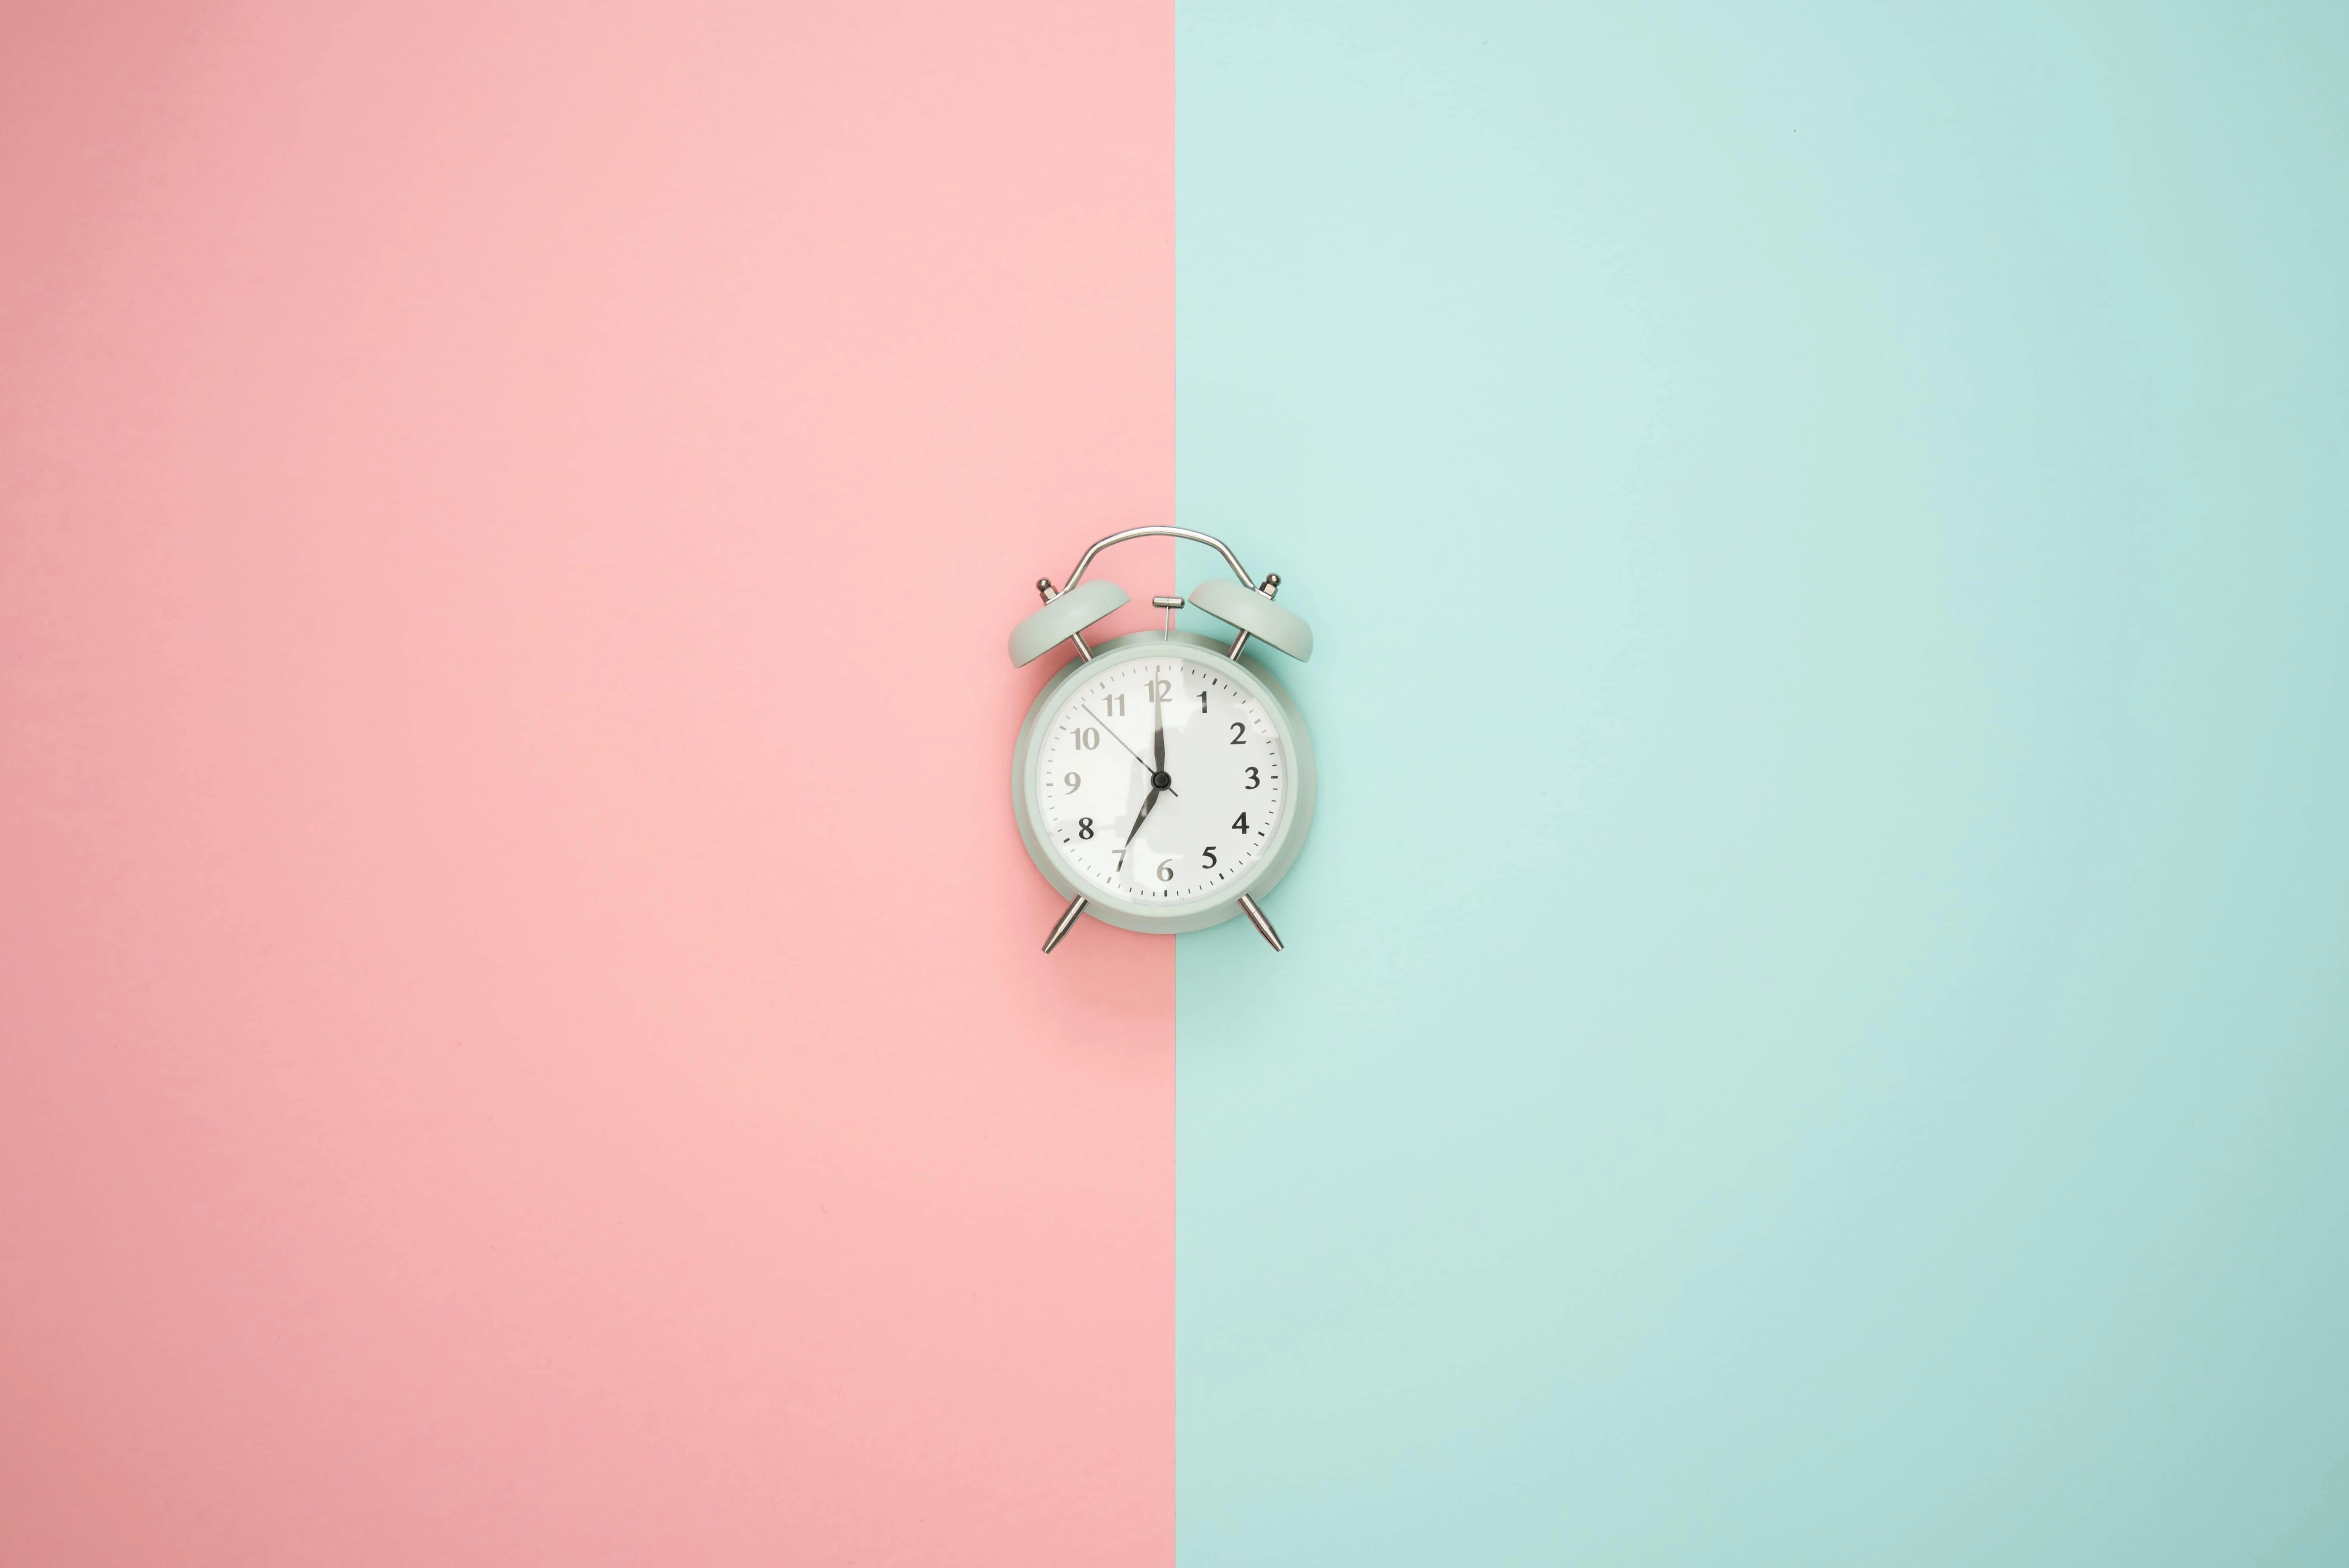 Old-fashioned clock in front of pale pink and pale blue background